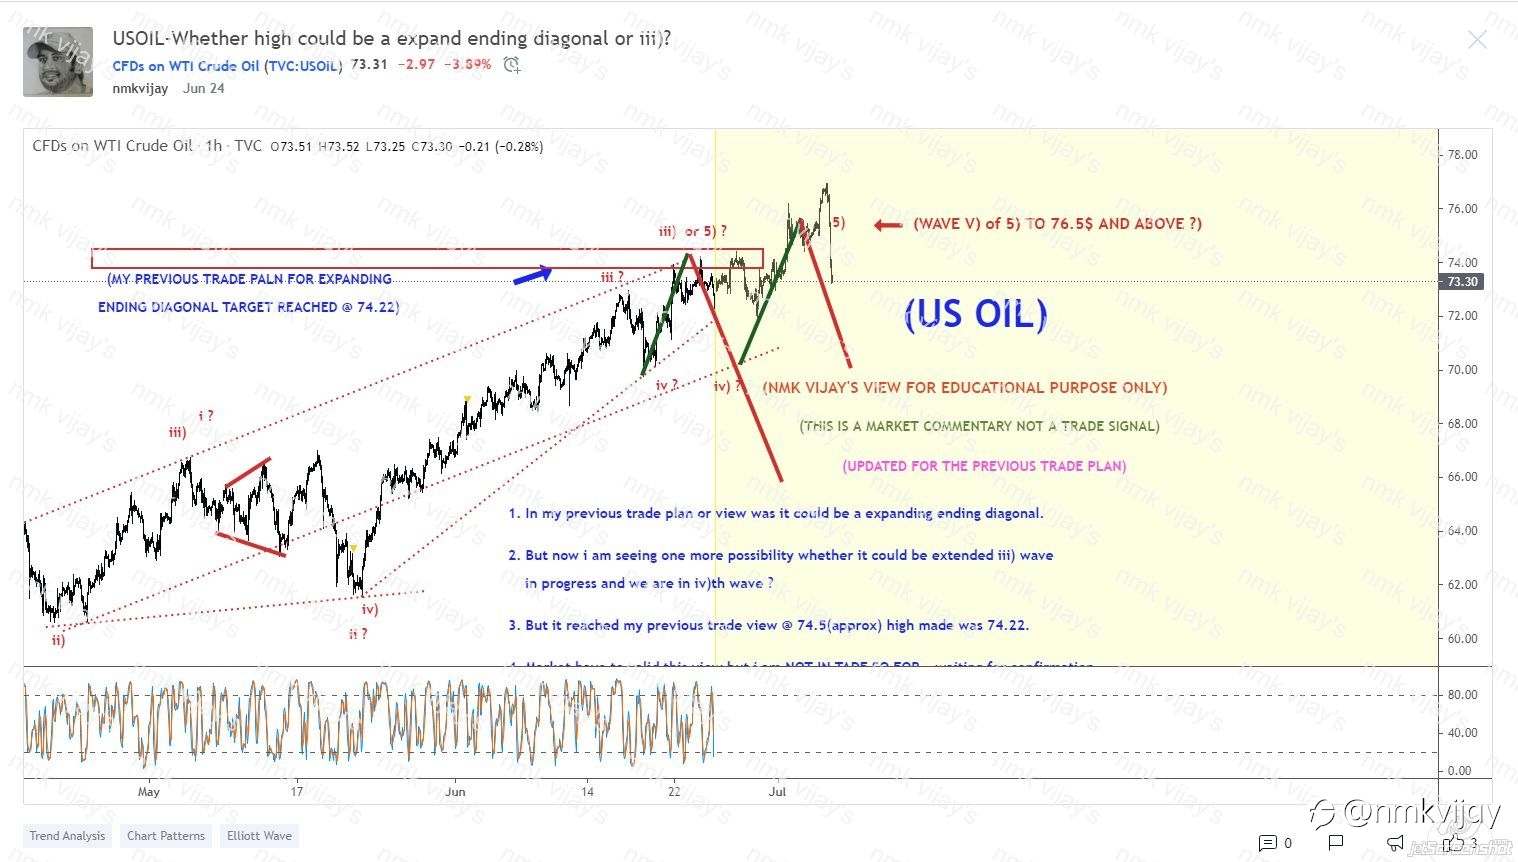 USOIL Shared here on 24th and predictions through Elliott Wave Art Theory BEAUTIFUL!!!